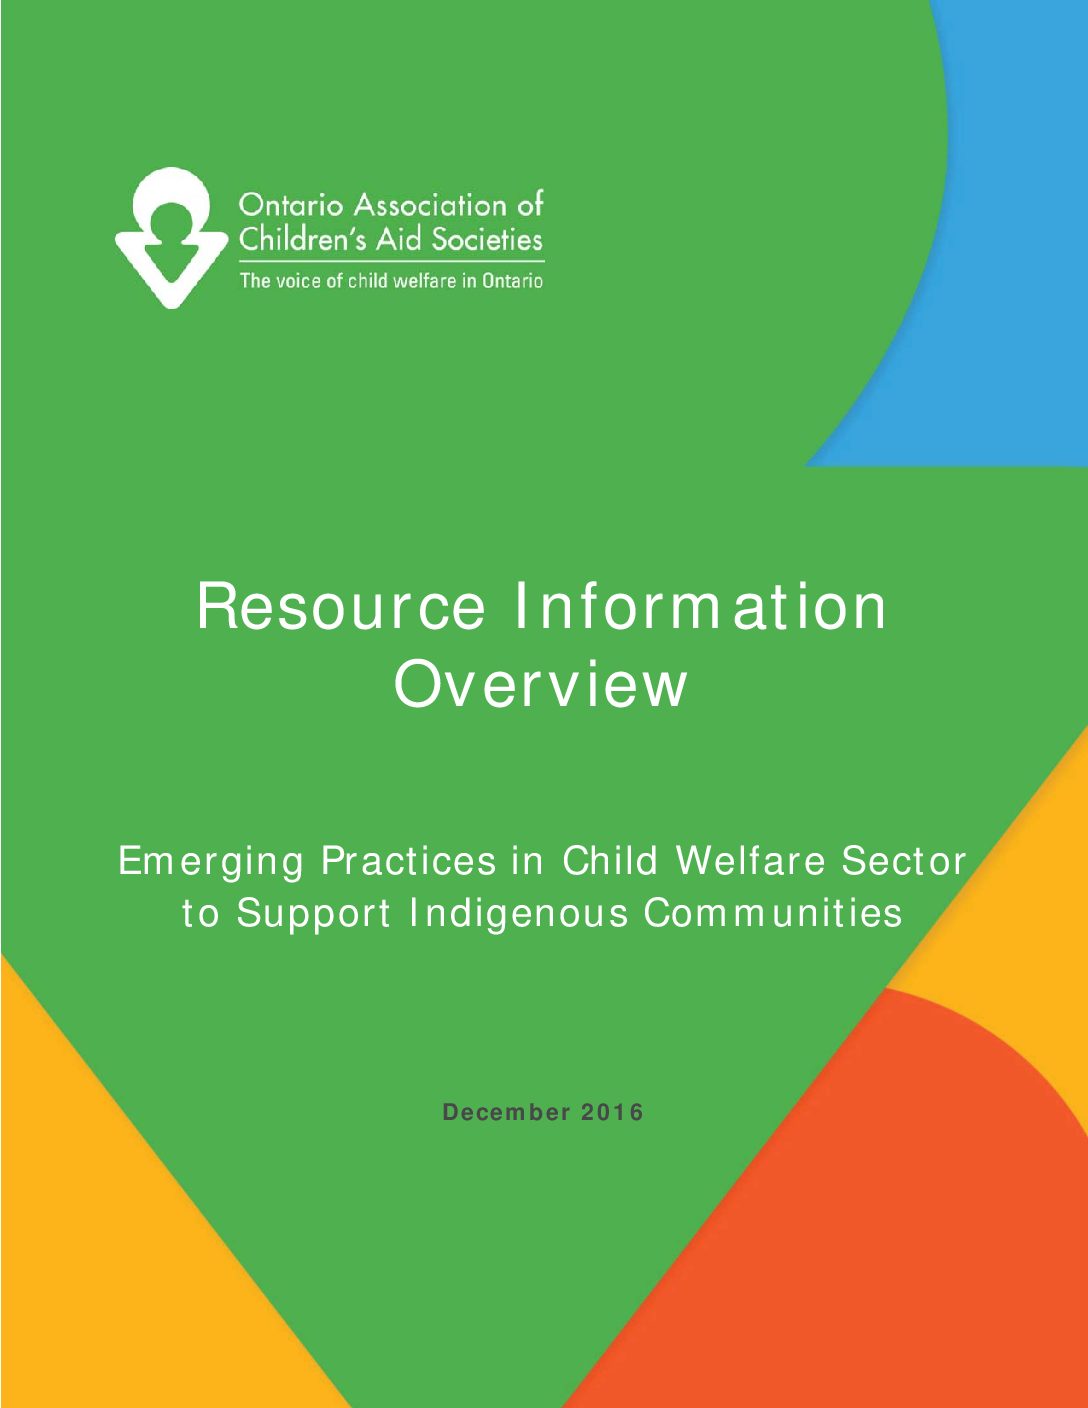 Resource Information Overview: Emerging Practices in Child Welfare Sector to Support Indigenous Communities